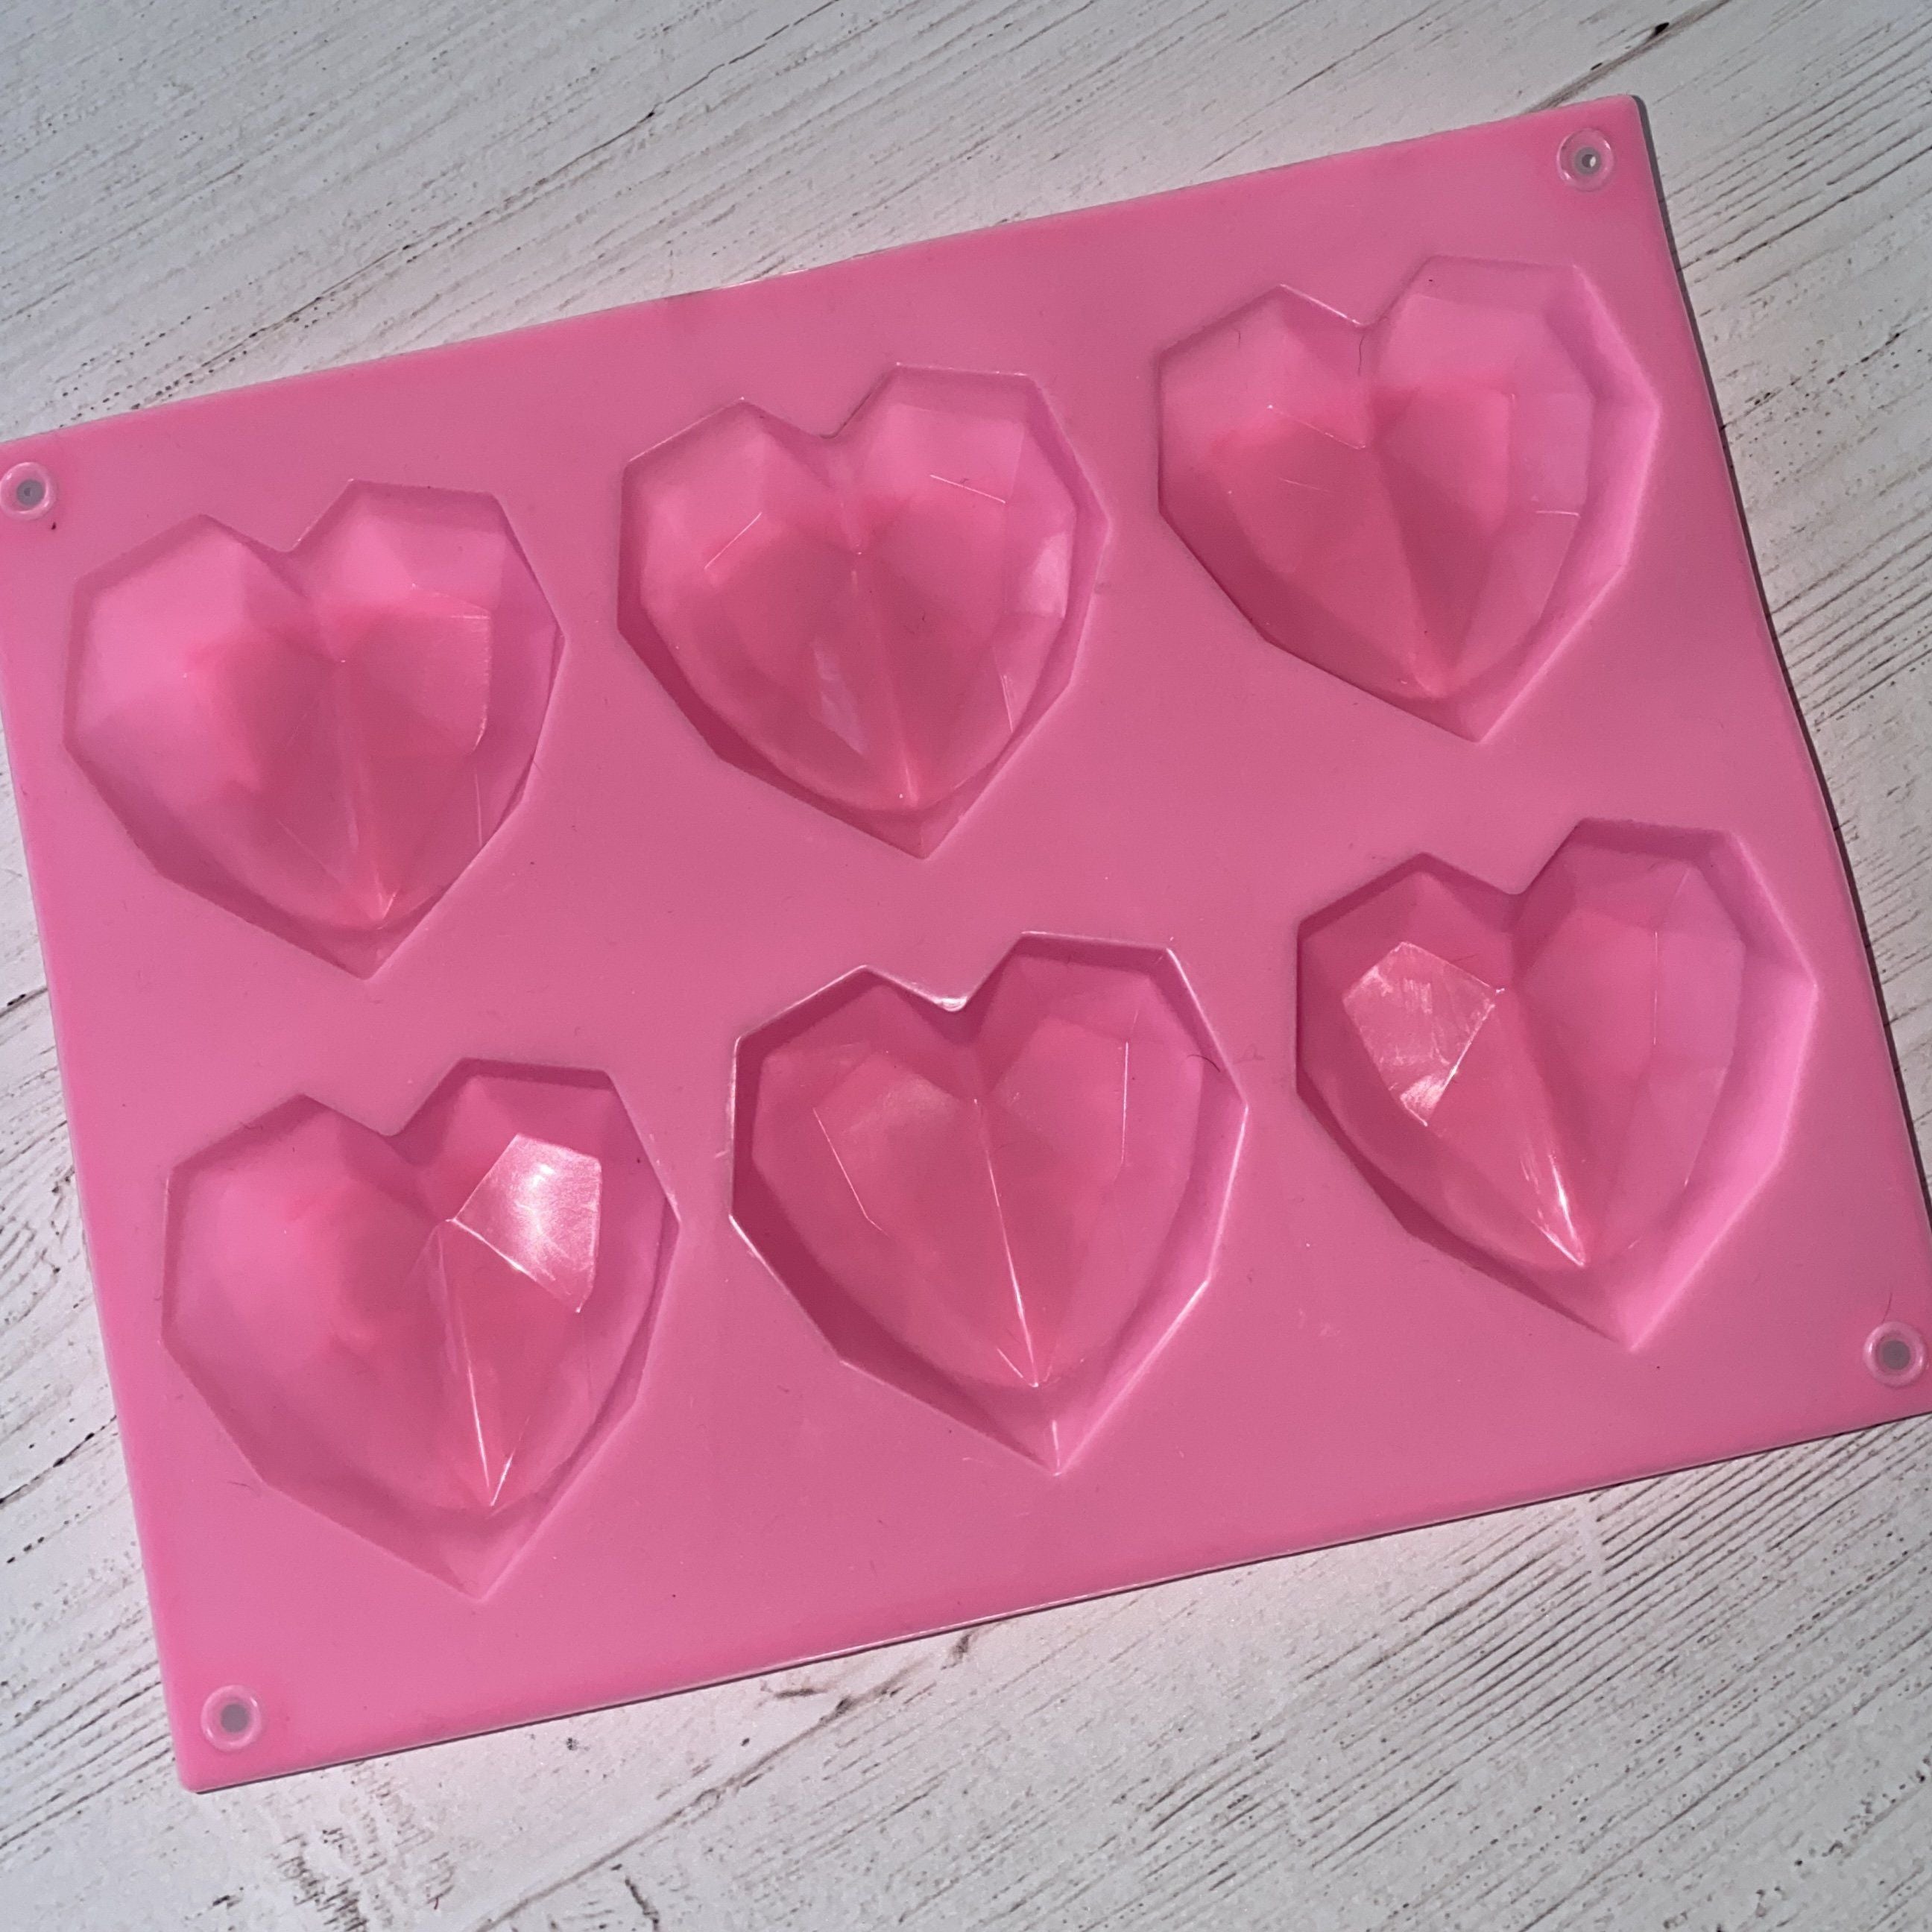 Soft Geometric Heart Mold - Breakable Heart – Busy Bakers Supplies